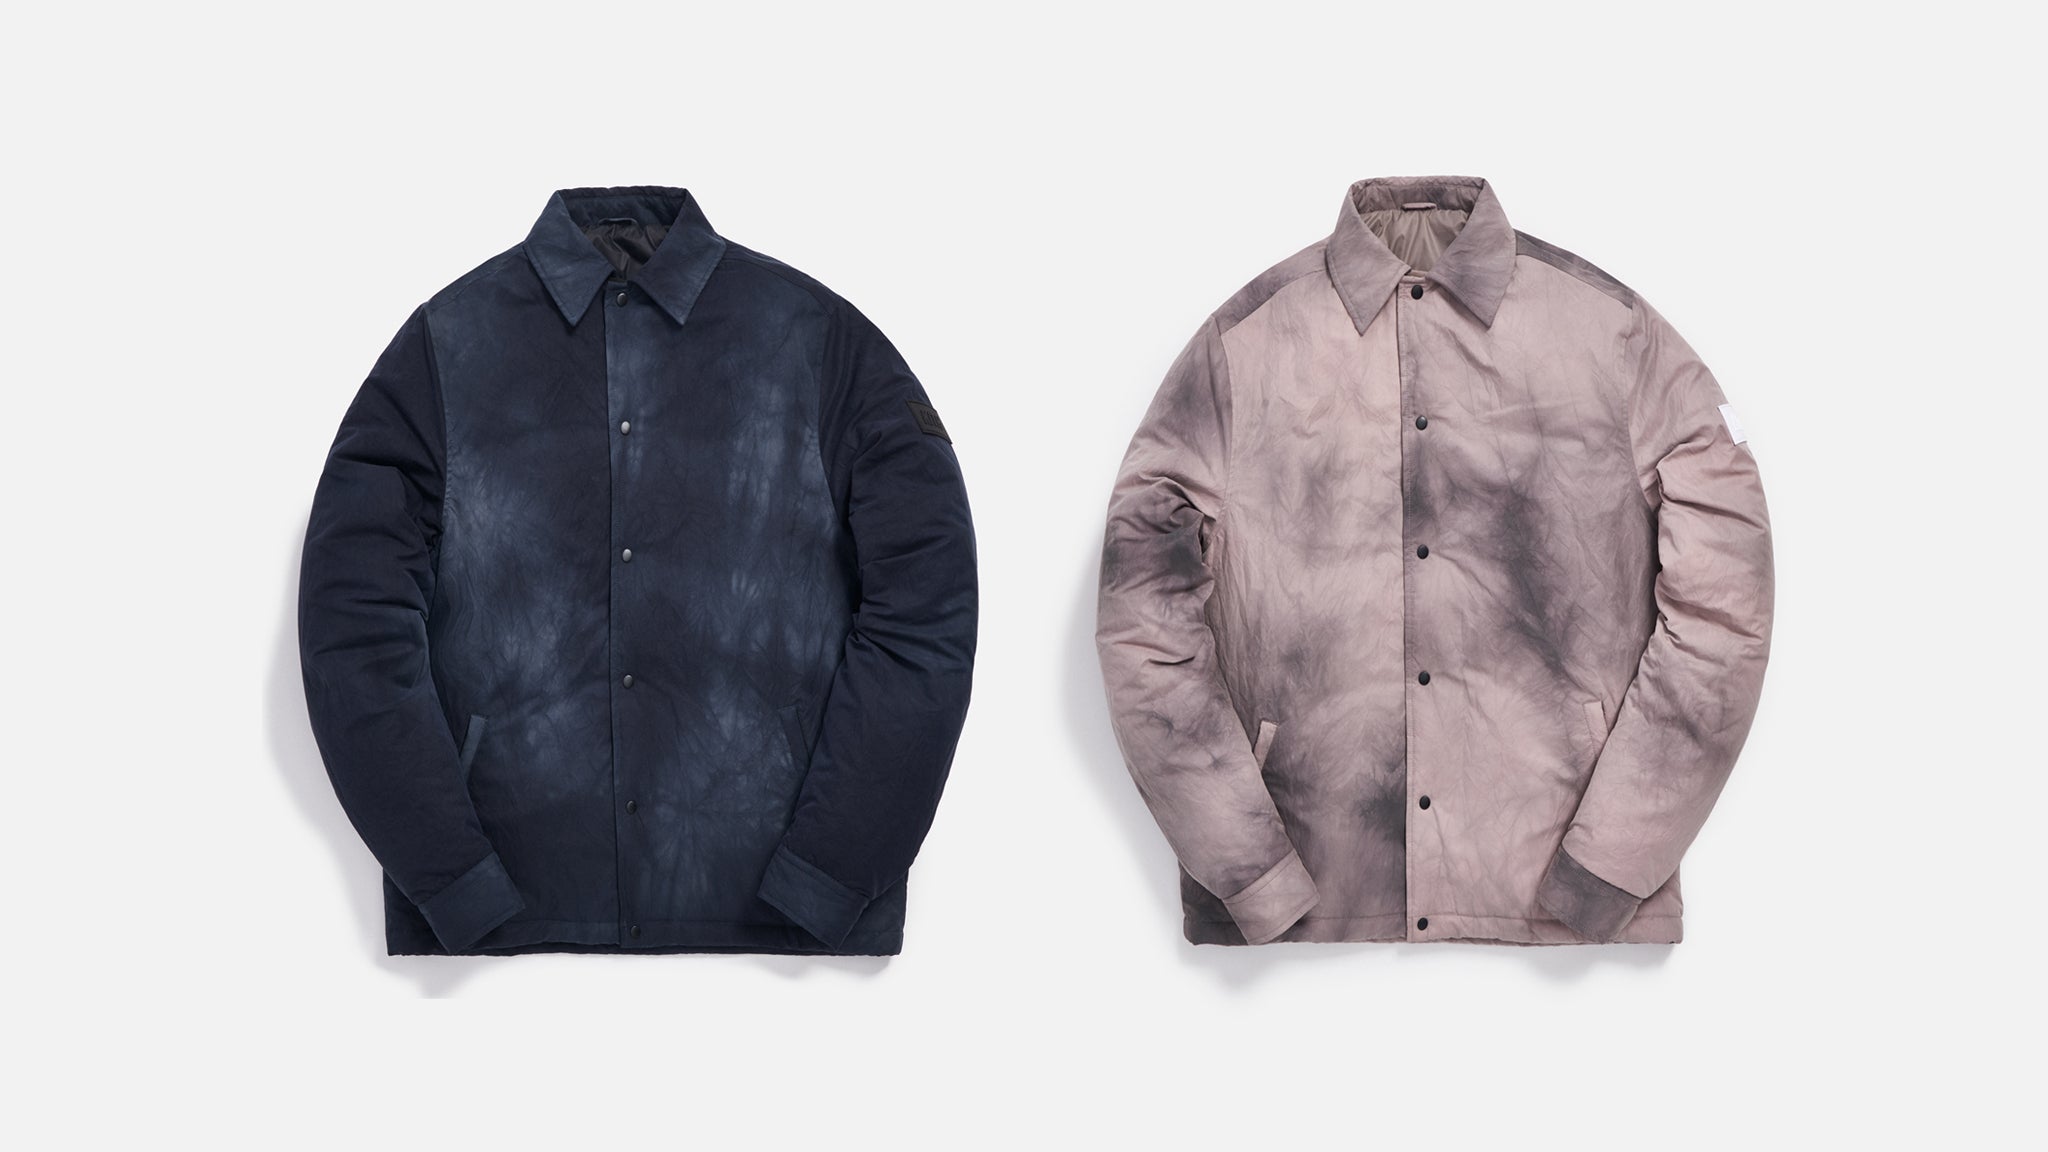 A Closer Look at Kith Winter 2019 Collection